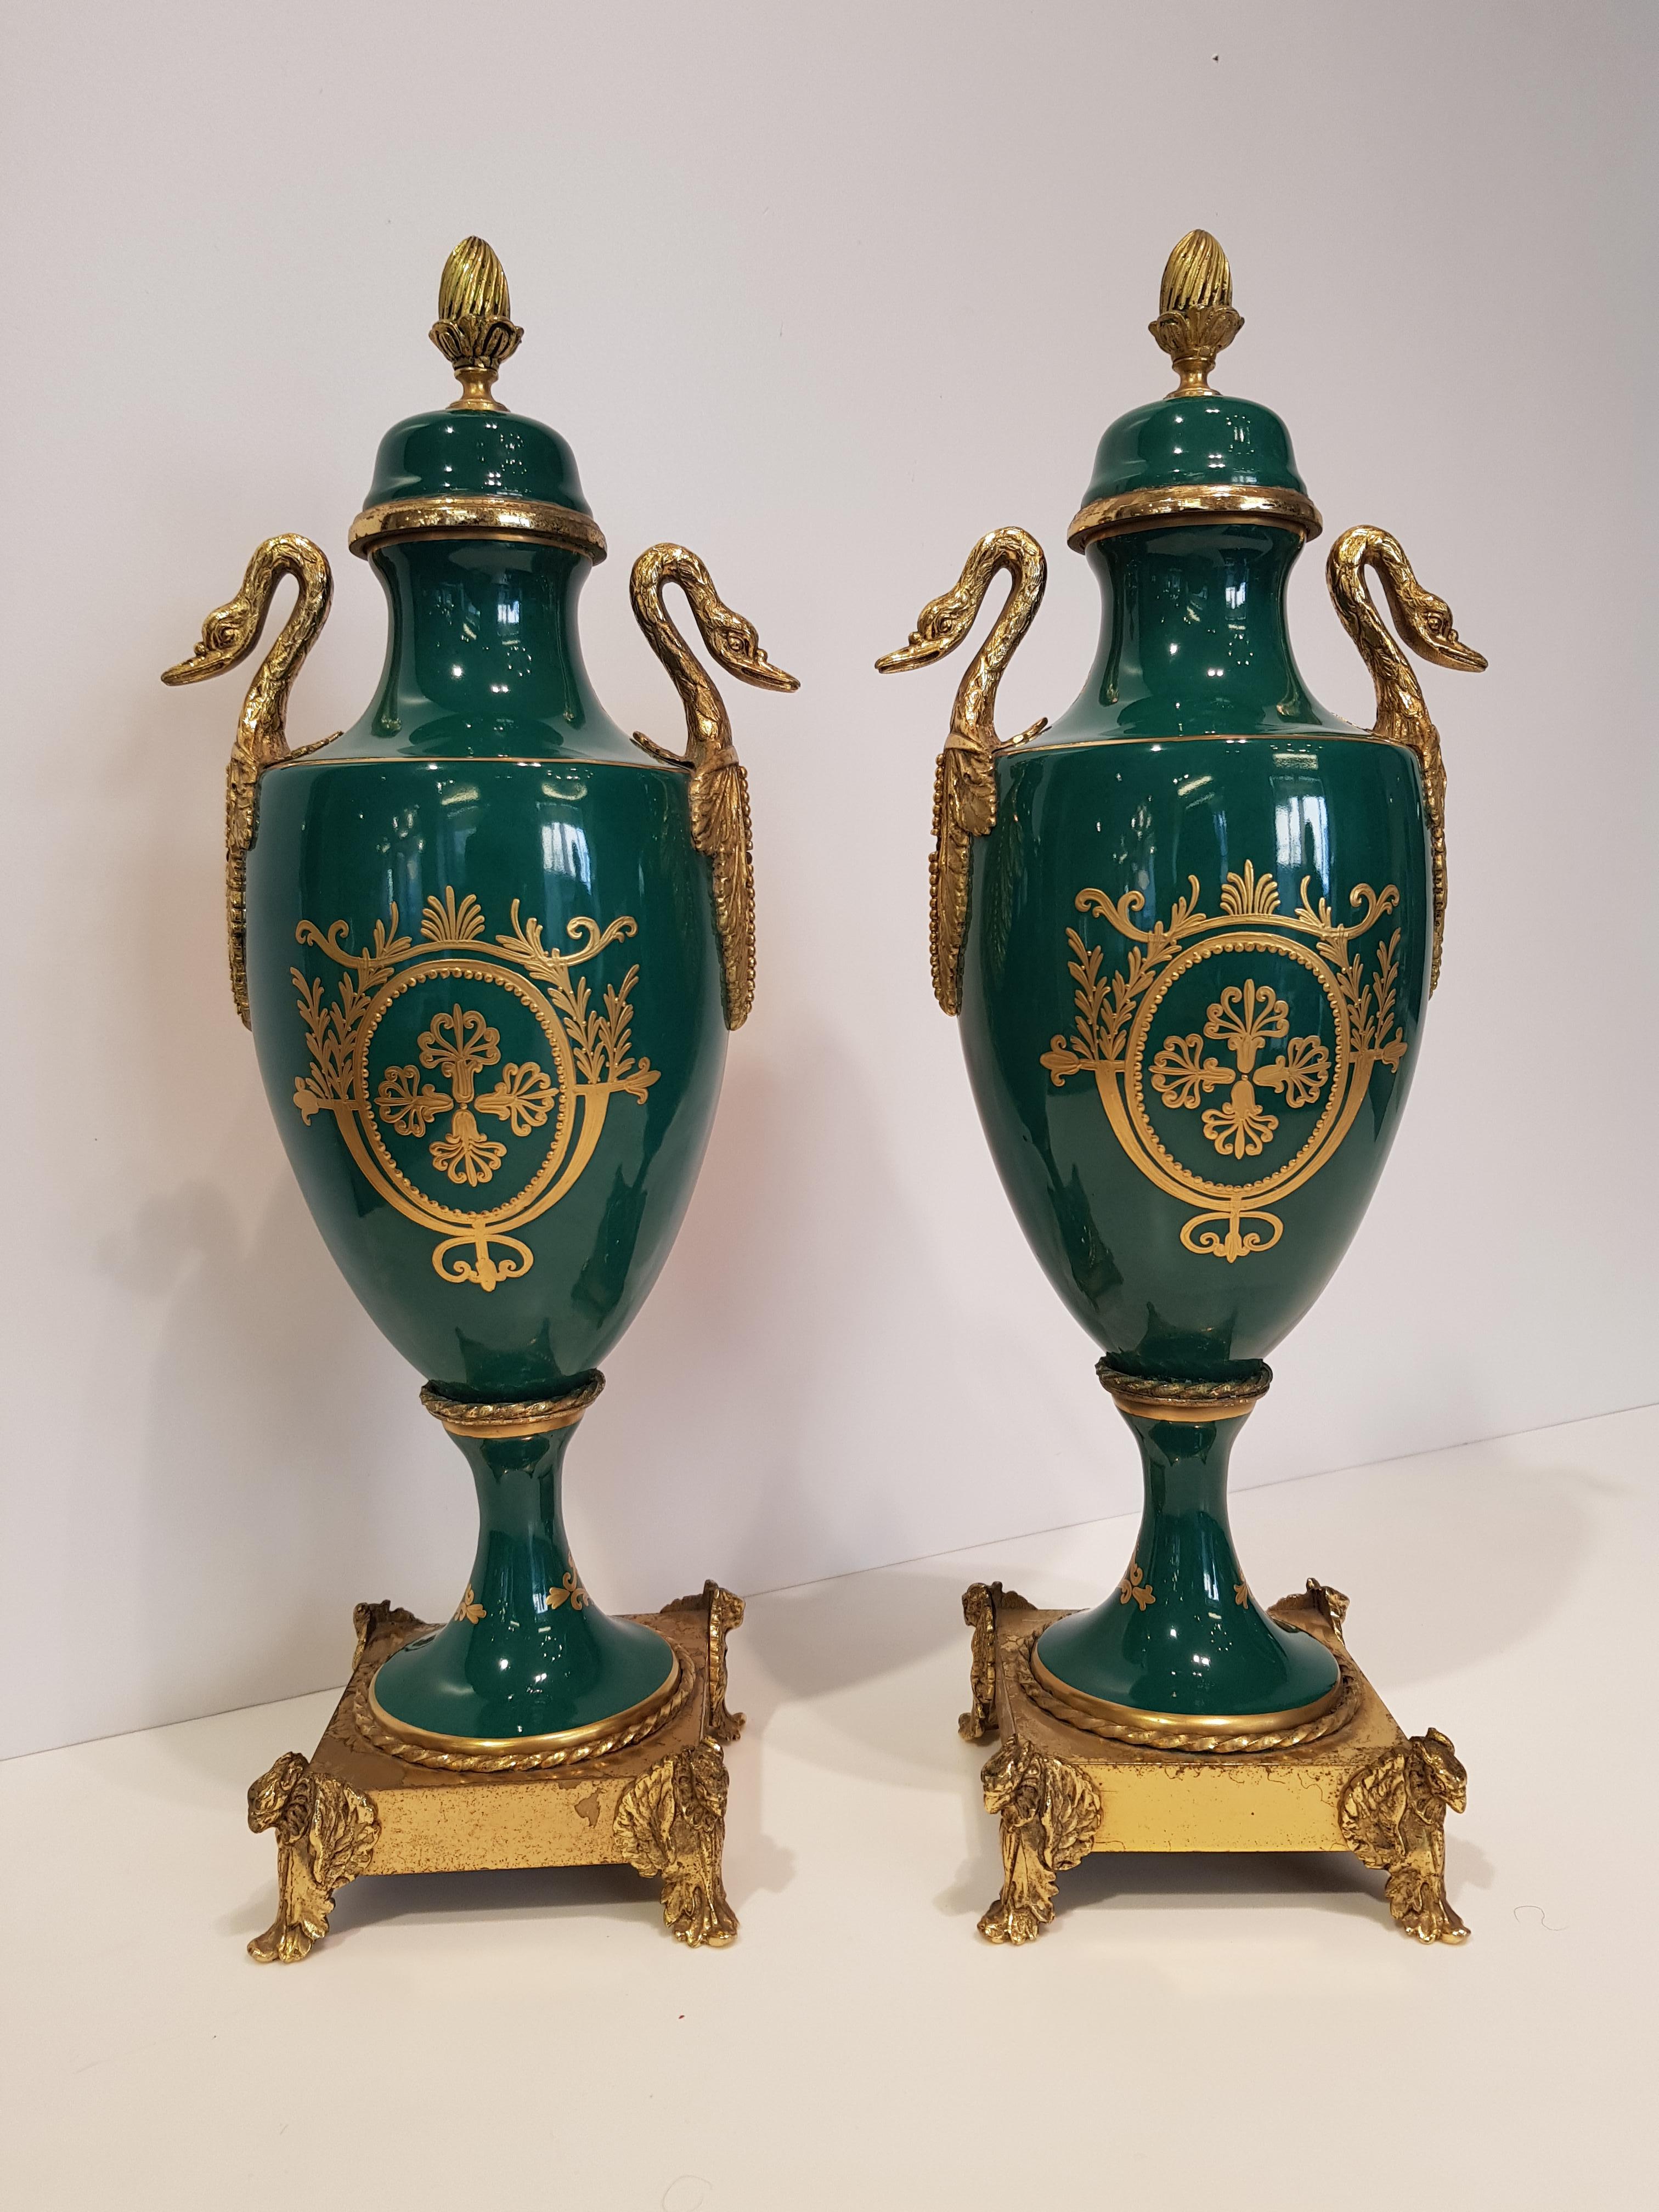 Antique pair of white swan neck vases in French porcelain made and decorated by hand in the 19th century.
The vases are characterized by a green background and embossed gold decorations with beautiful central scenes depicting the coronation of